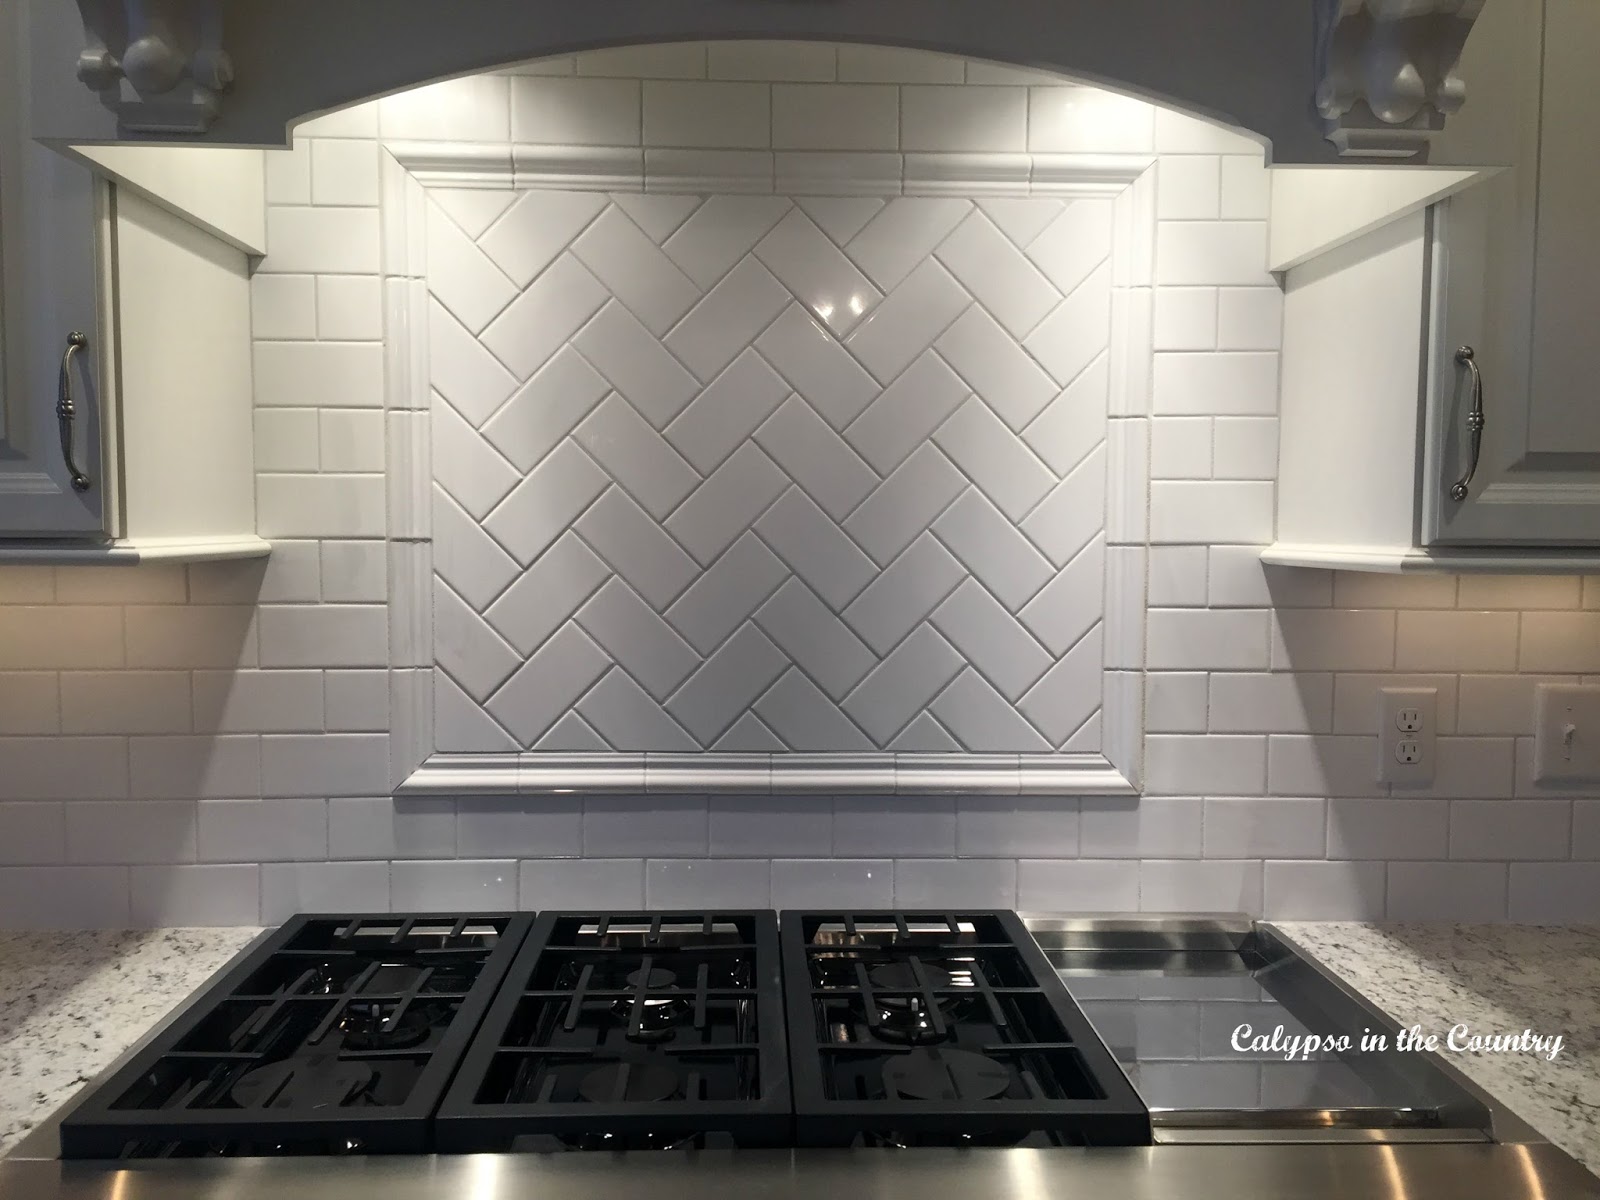 Herringbone Pattern Subway Tile over Stove - White Subway Tile with White Grout